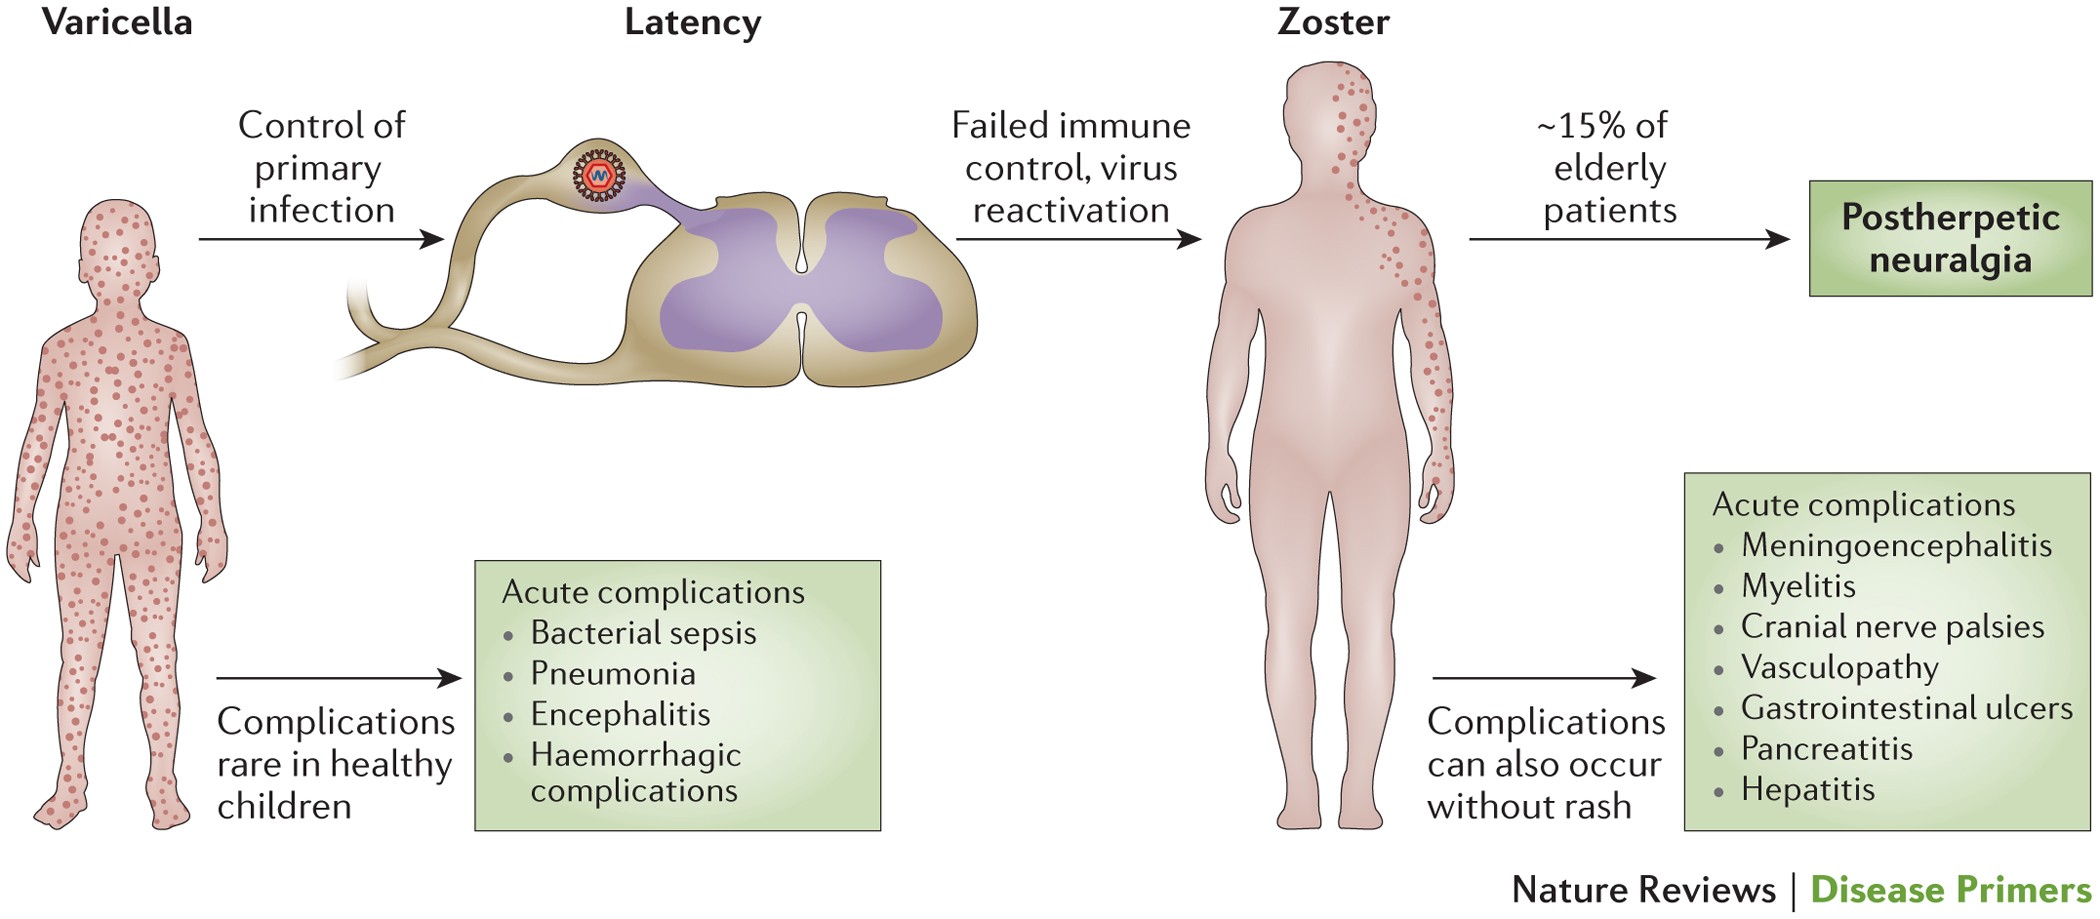 Varicella zoster virus infection | Nature Reviews Disease Primers